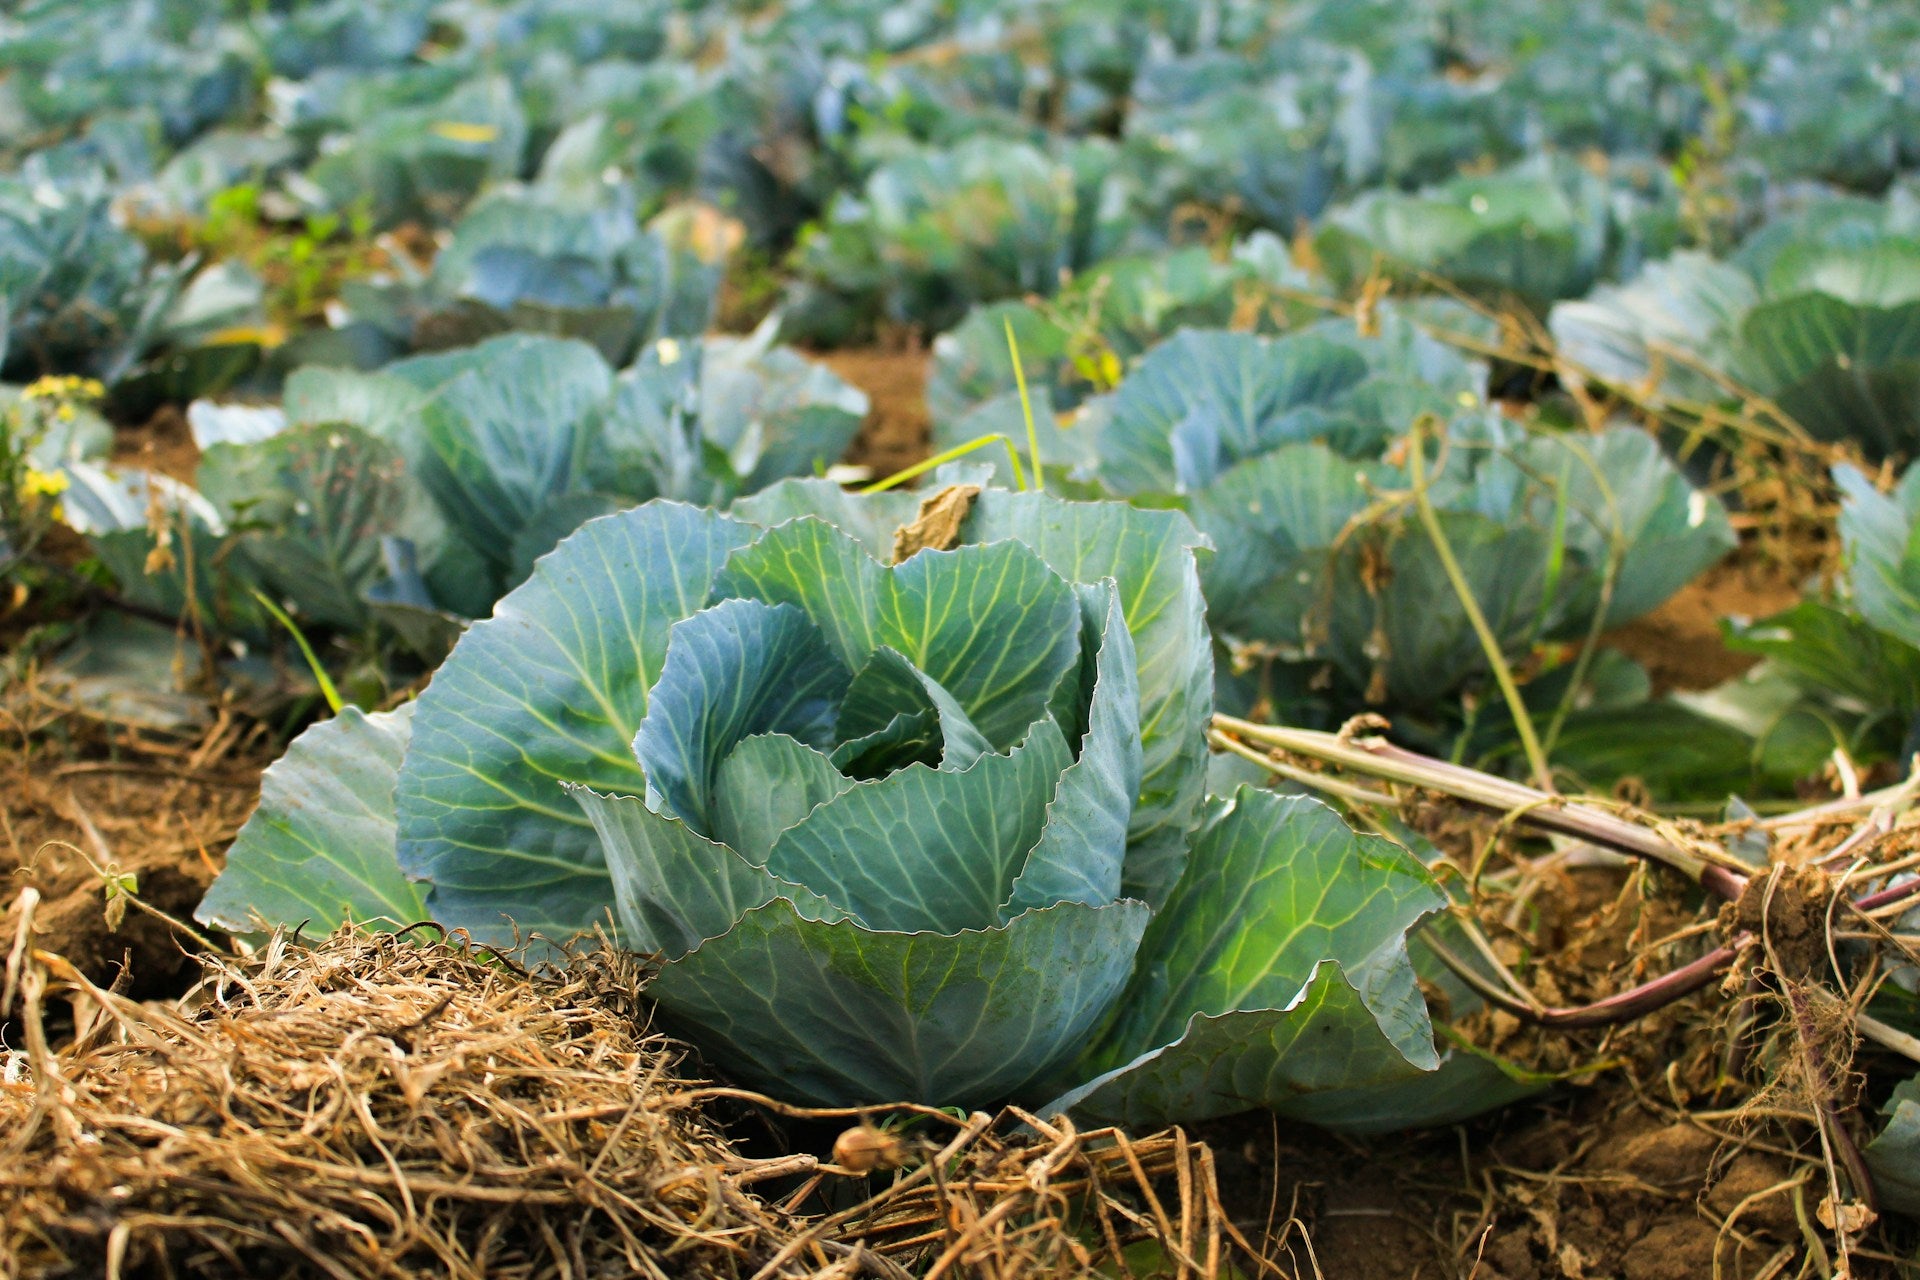 Cabbage with hay or mulch around it for water conservation